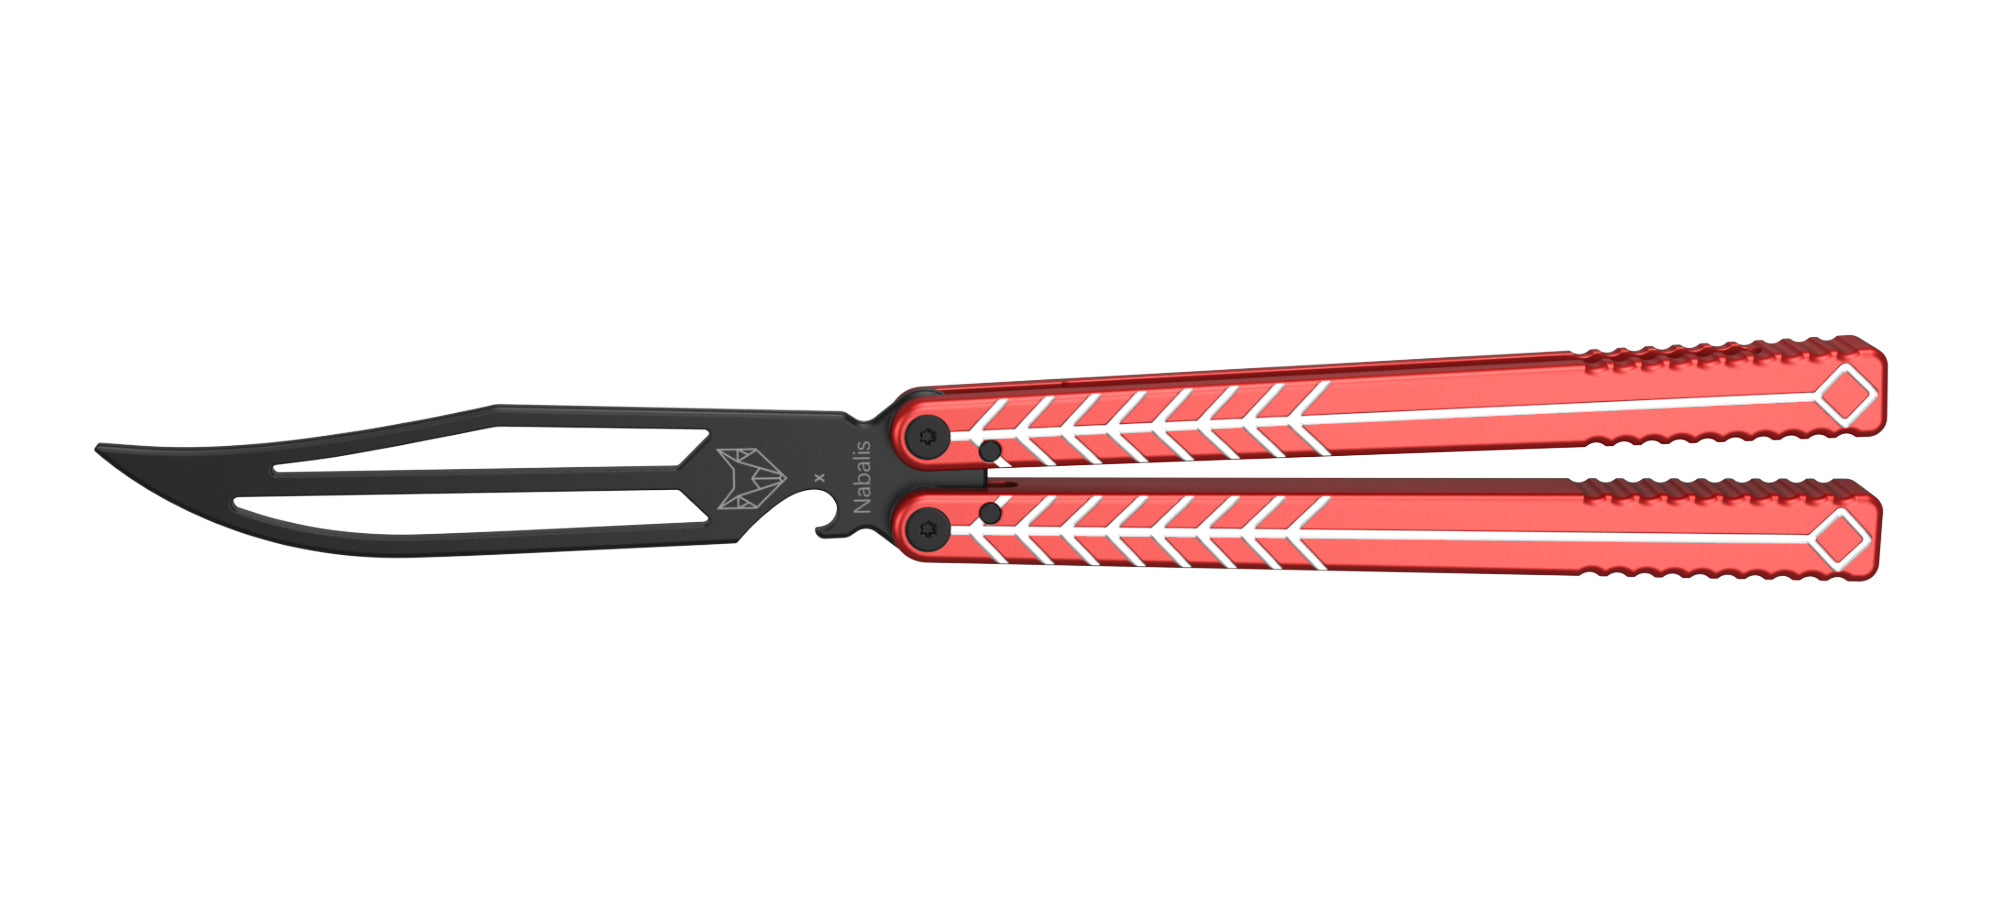 Nabalis Vulp balisong training butterfly knife-Red